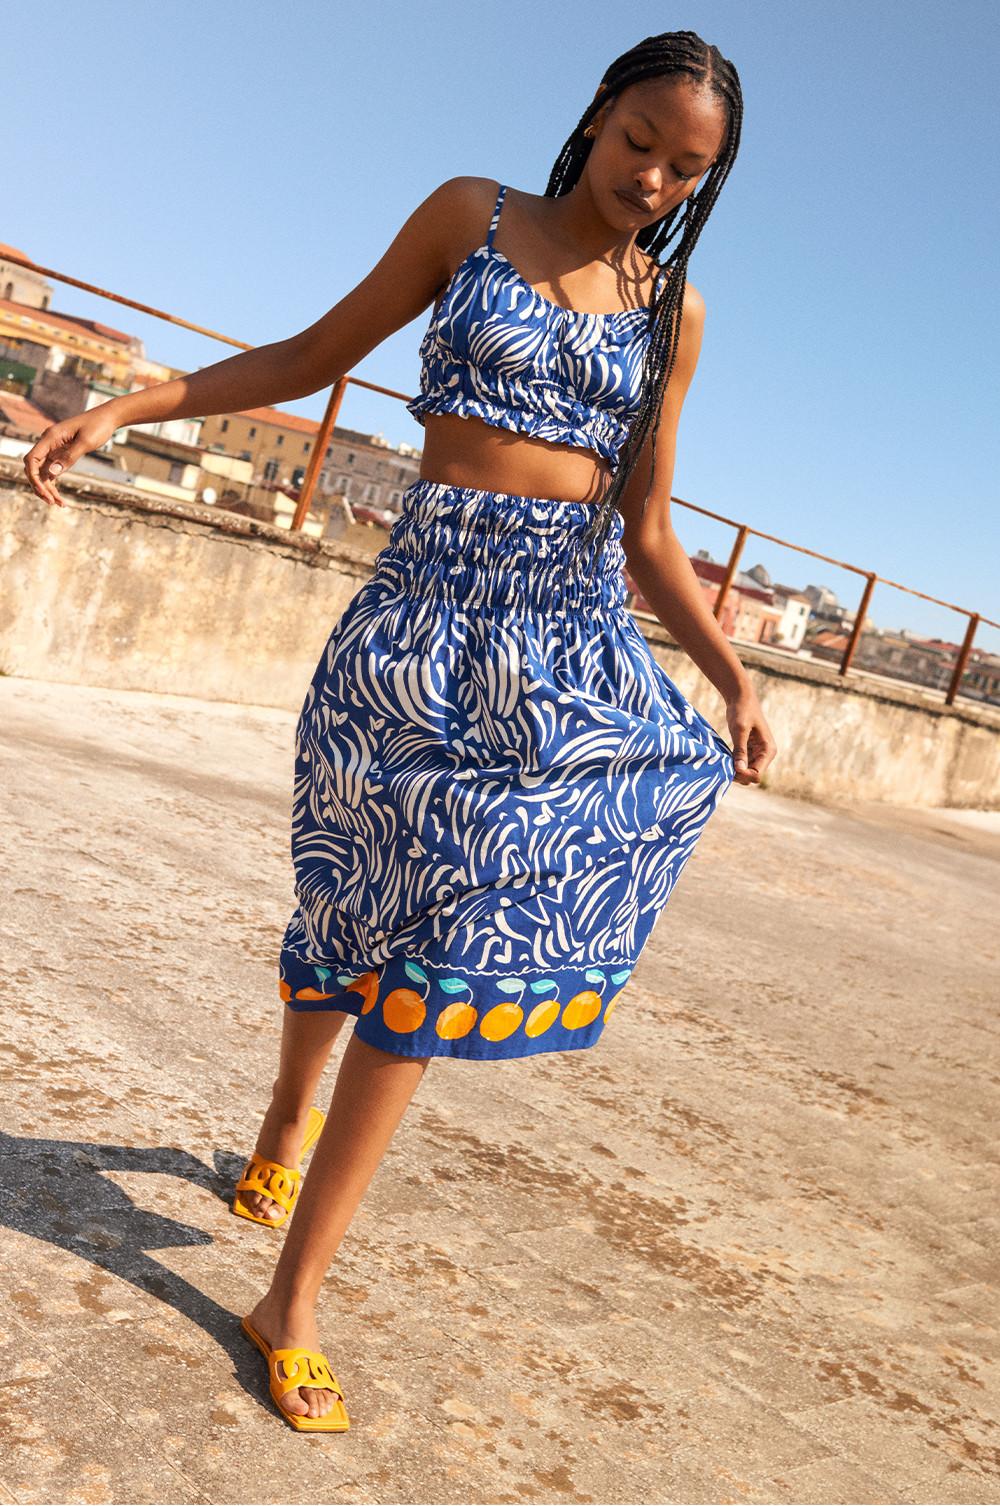 Woman in a matching blue and white co-ord with tangerine detailing